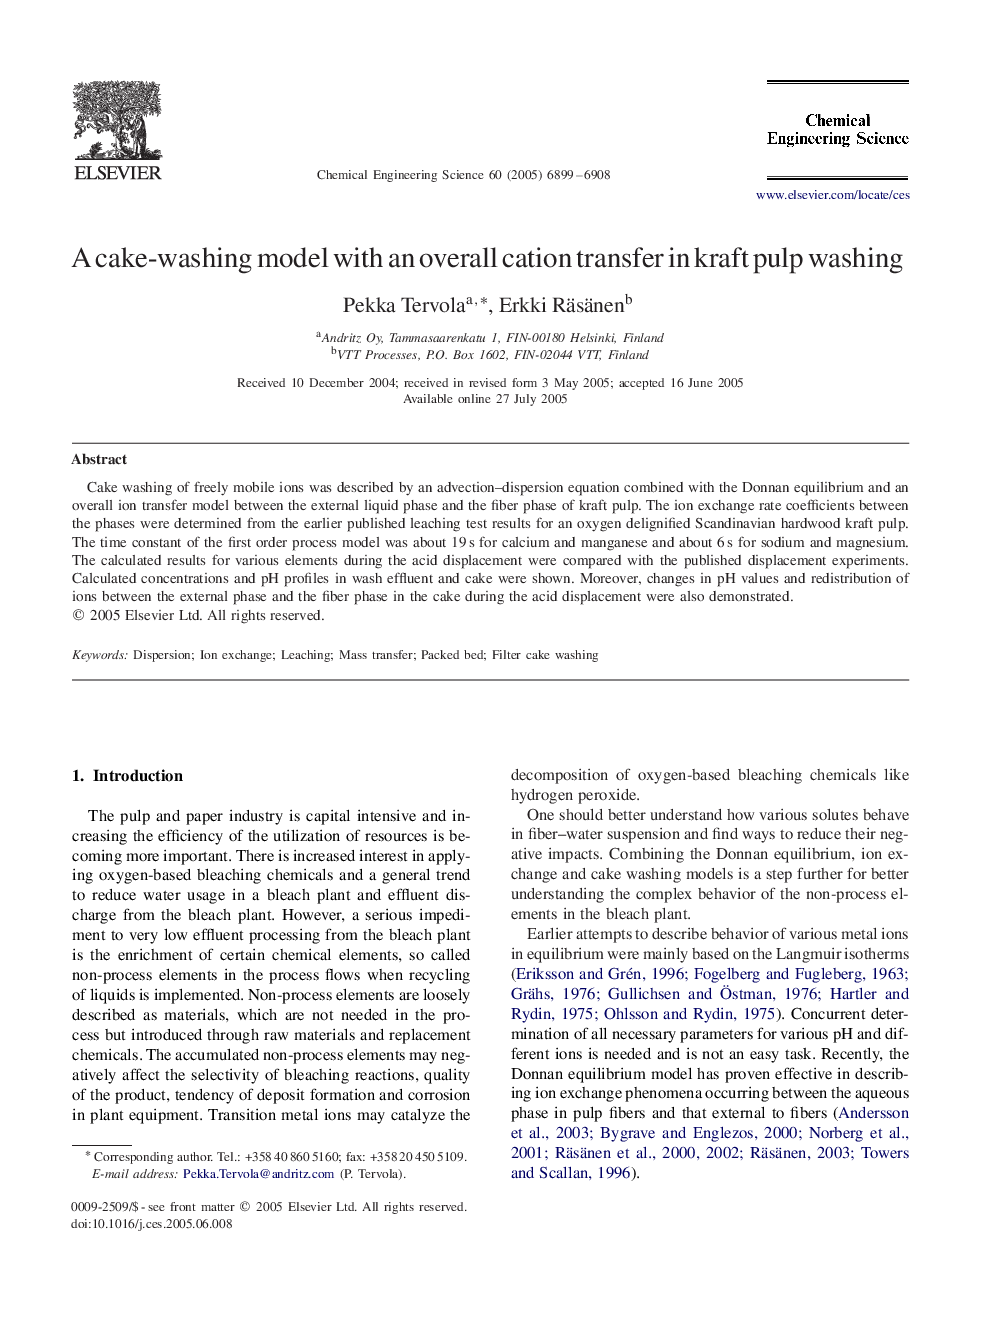 A cake-washing model with an overall cation transfer in kraft pulp washing